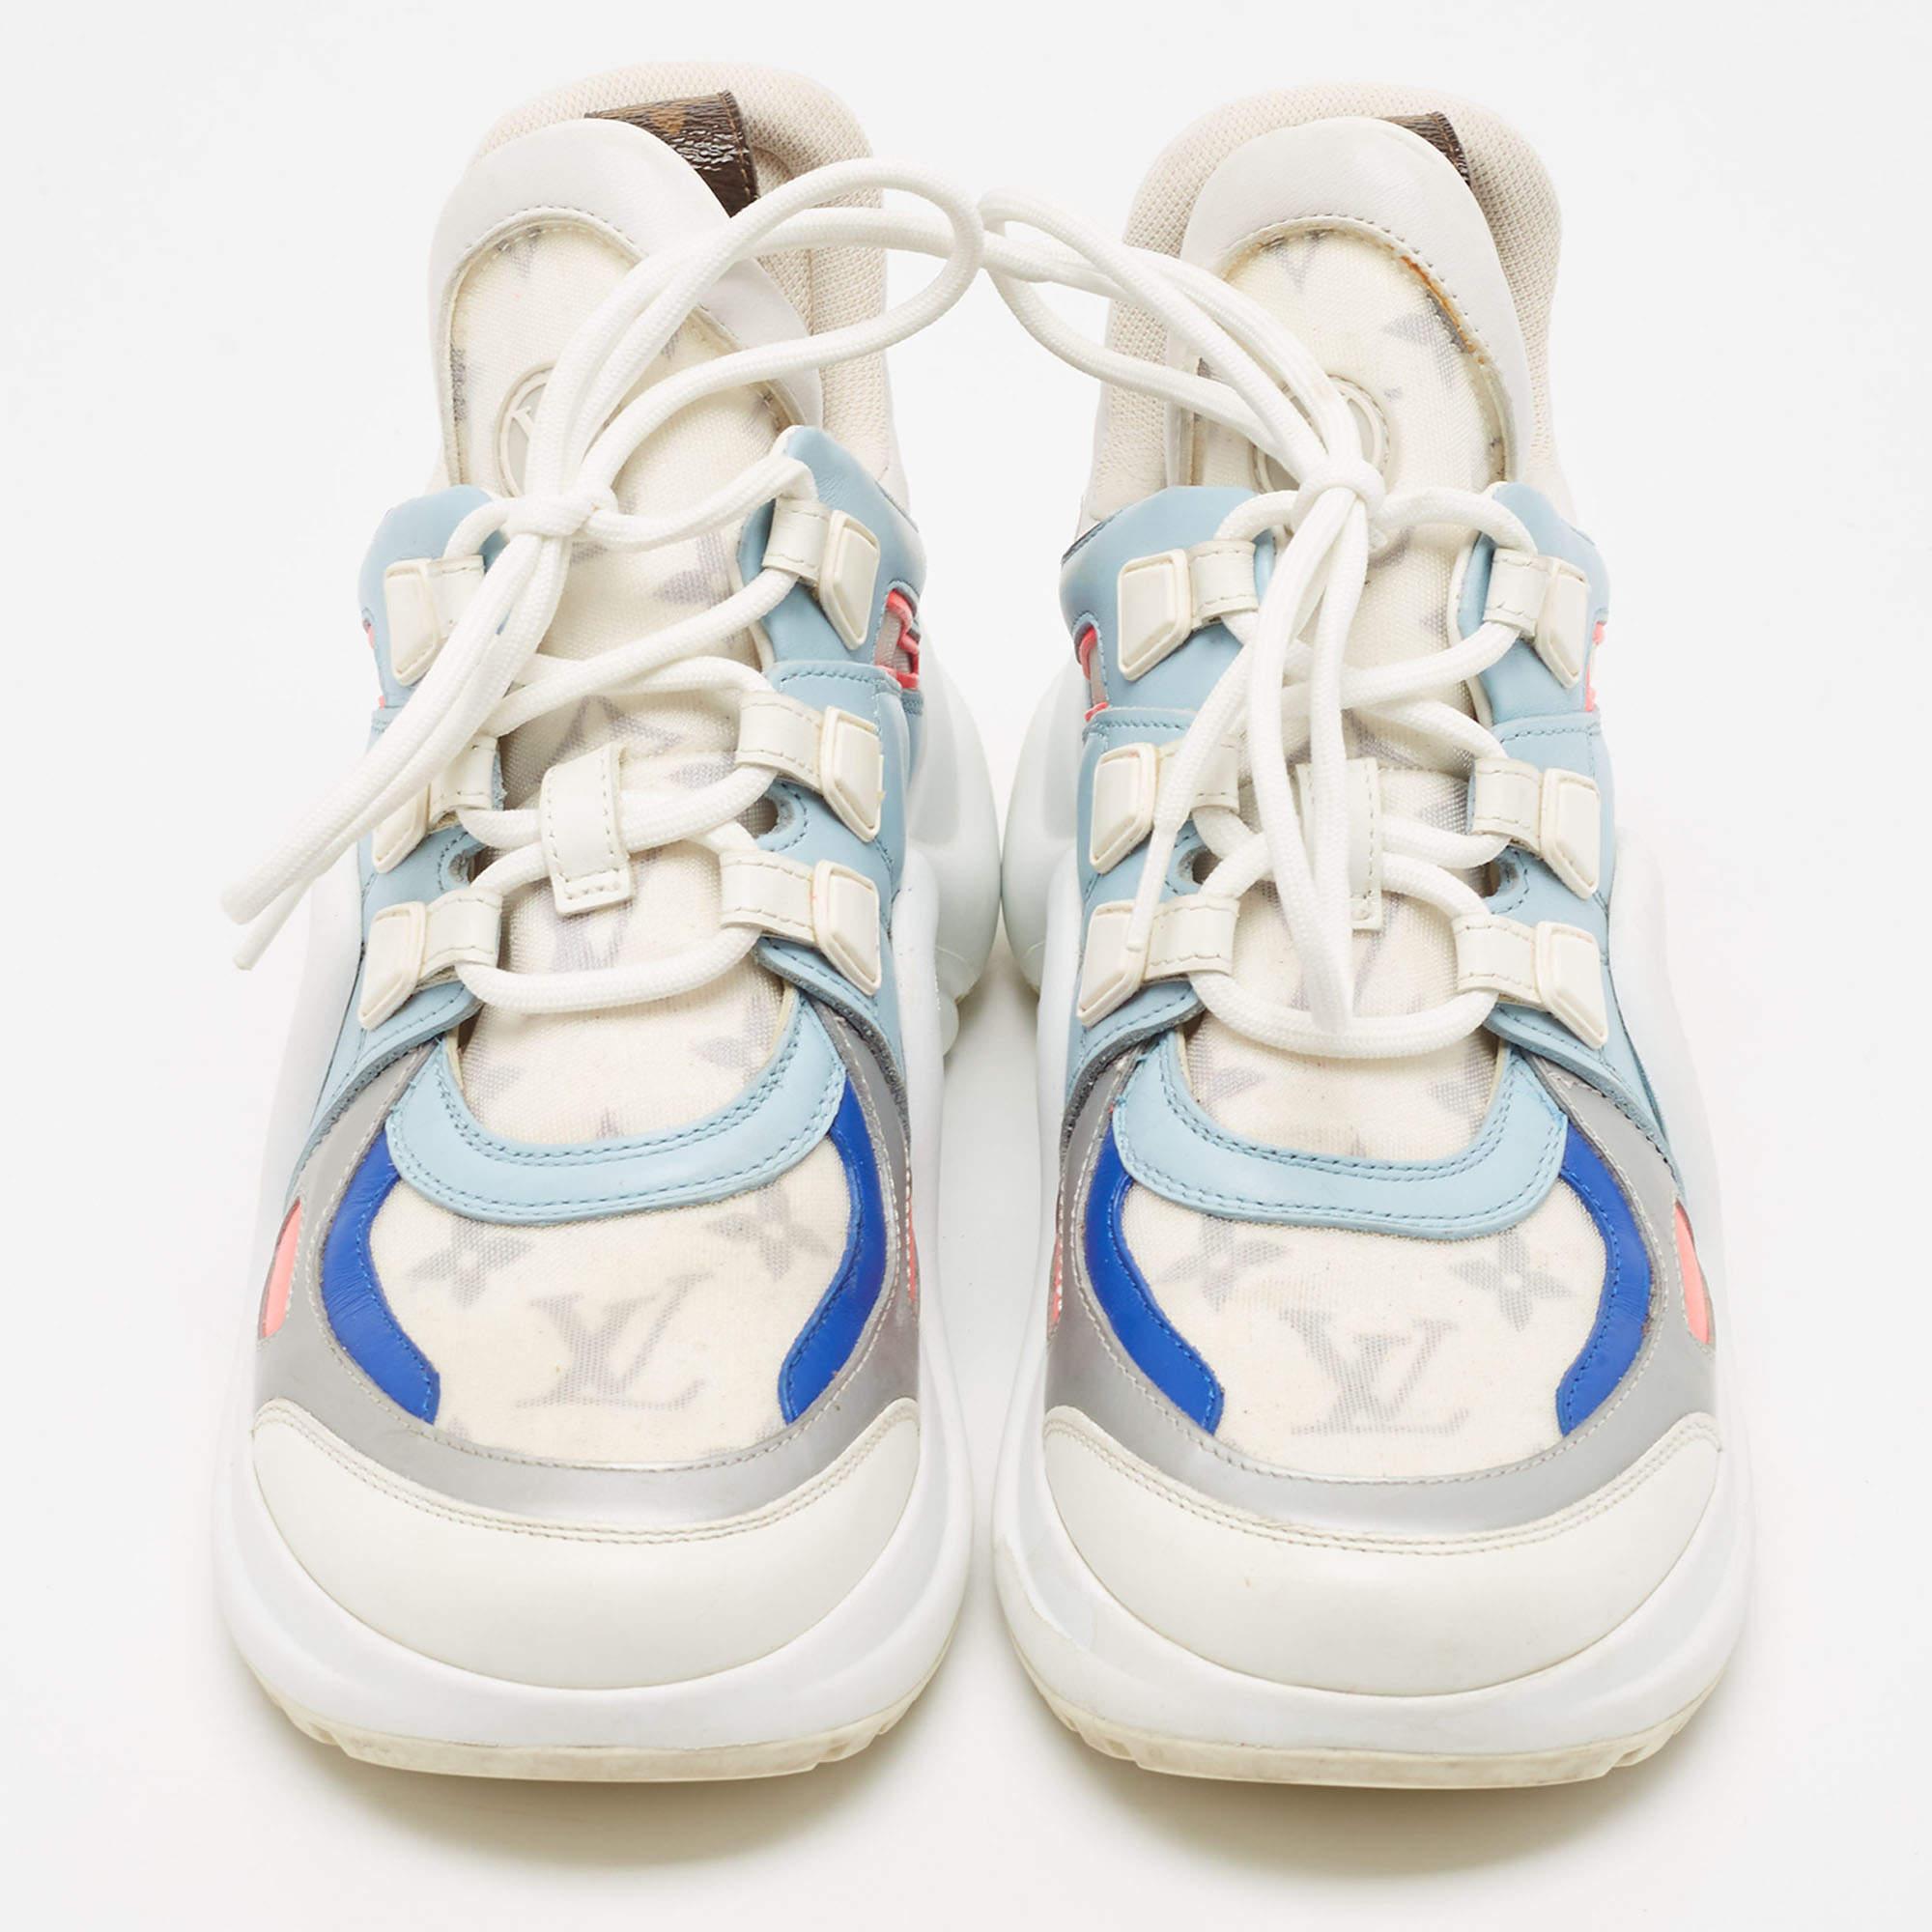 Step into fashion-forward luxury with these Louis Vuitton Archlight sneakers. These premium kicks offer a harmonious blend of style and comfort, perfect for those who demand sophistication in every step.

Includes: Original Dustbag

